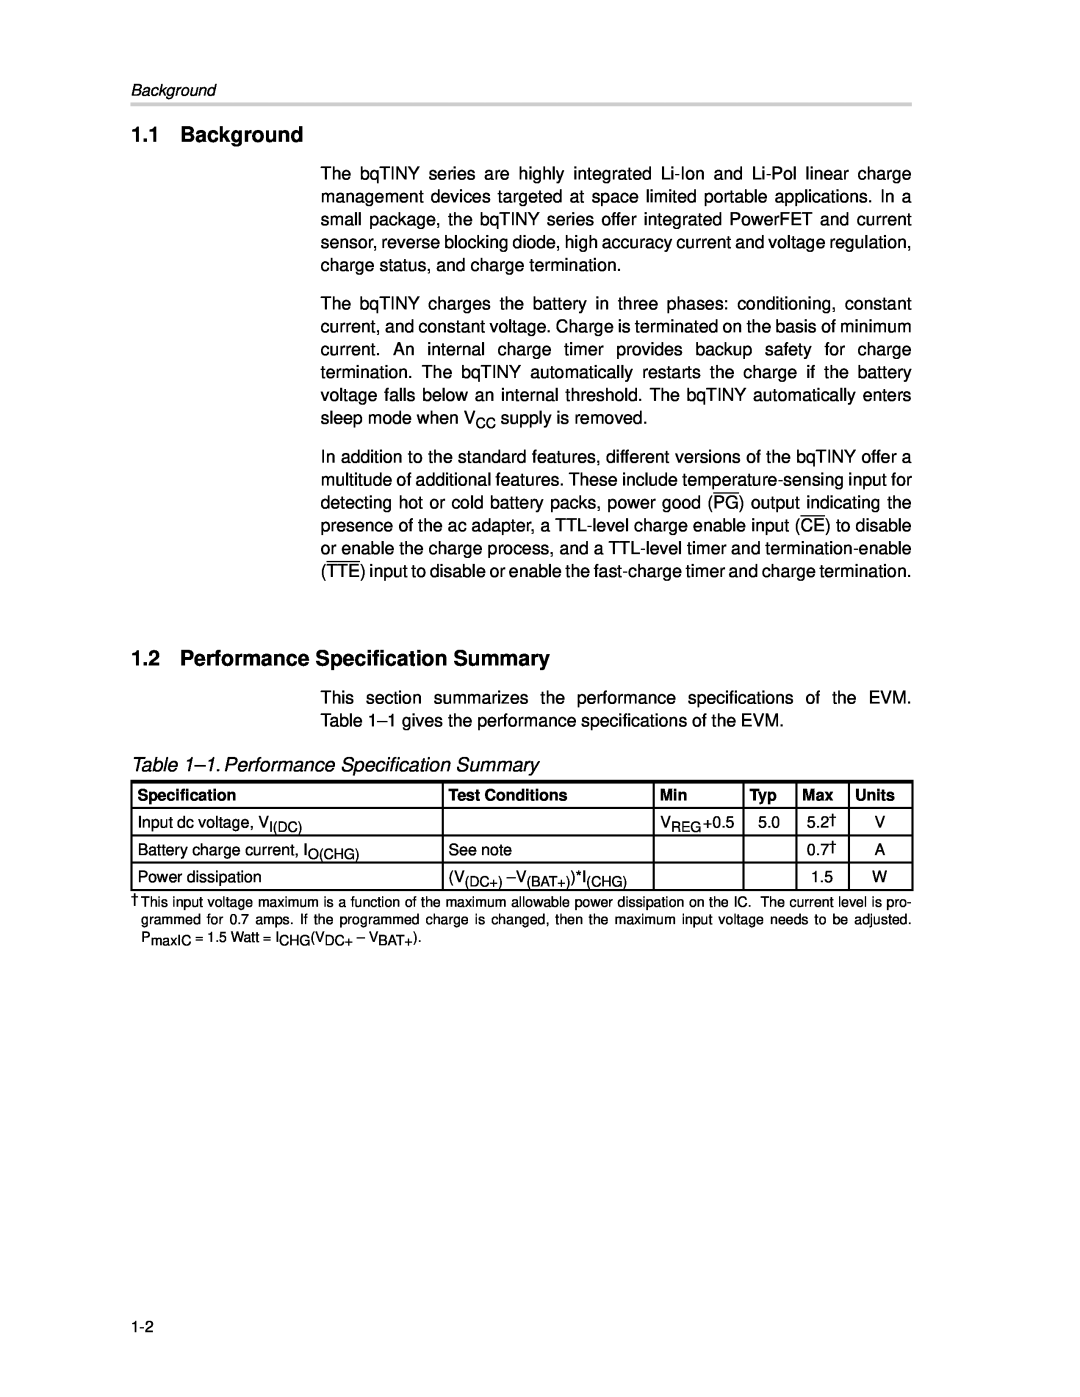 Texas Instruments bq24010/2 manual Background, 1. Performance Specification Summary 